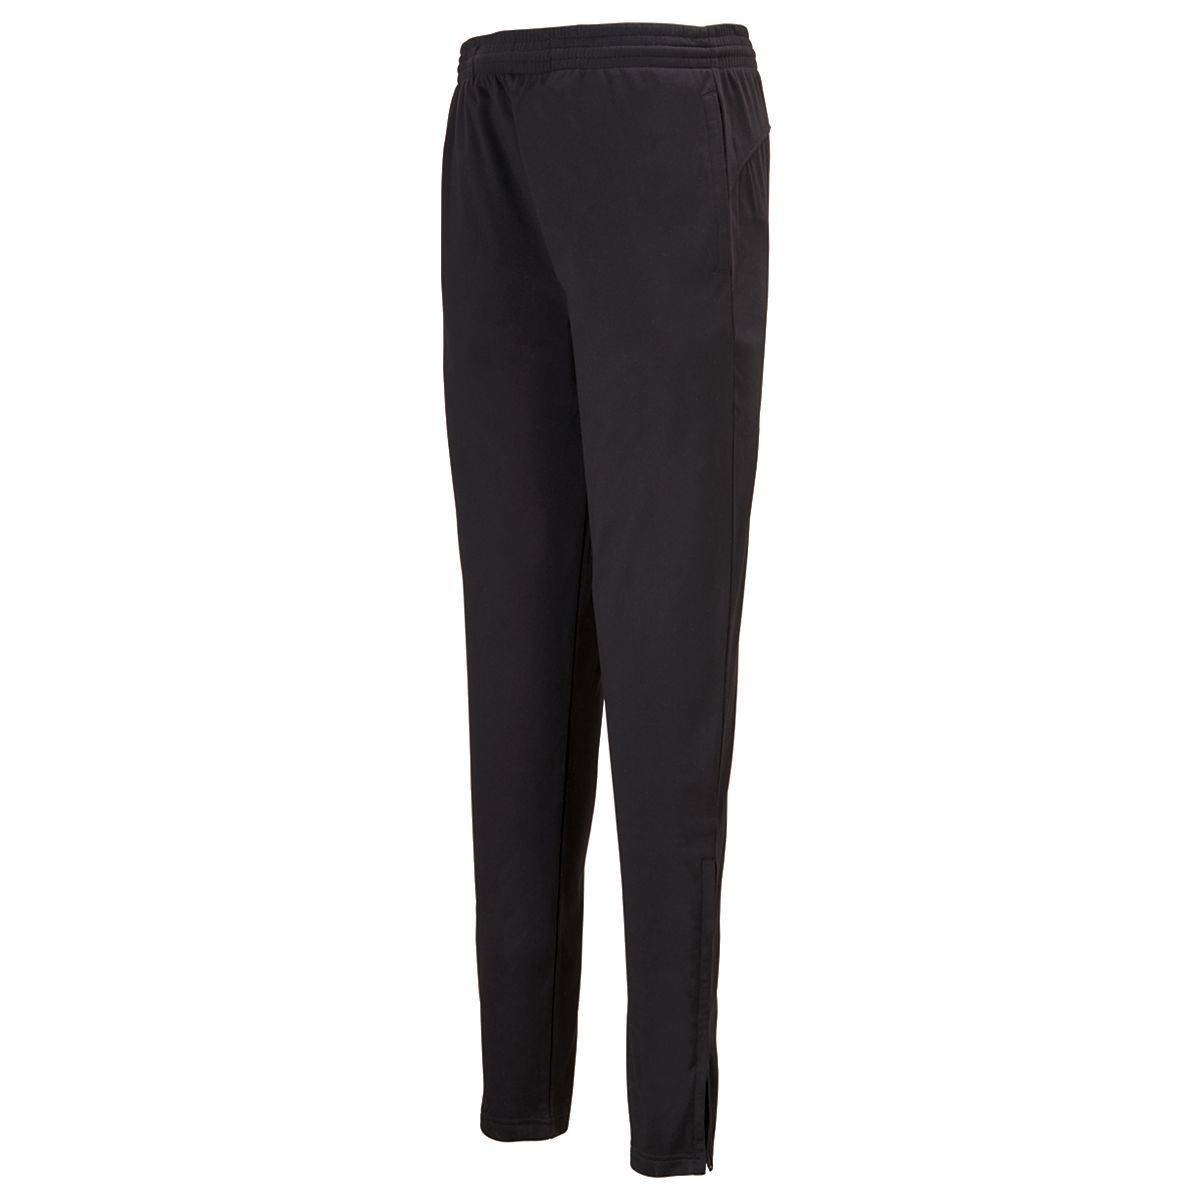 Augusta Sportswear Tapered Leg Pant in Black  -Part of the Adult, Adult-Pants, Pants, Augusta-Products product lines at KanaleyCreations.com